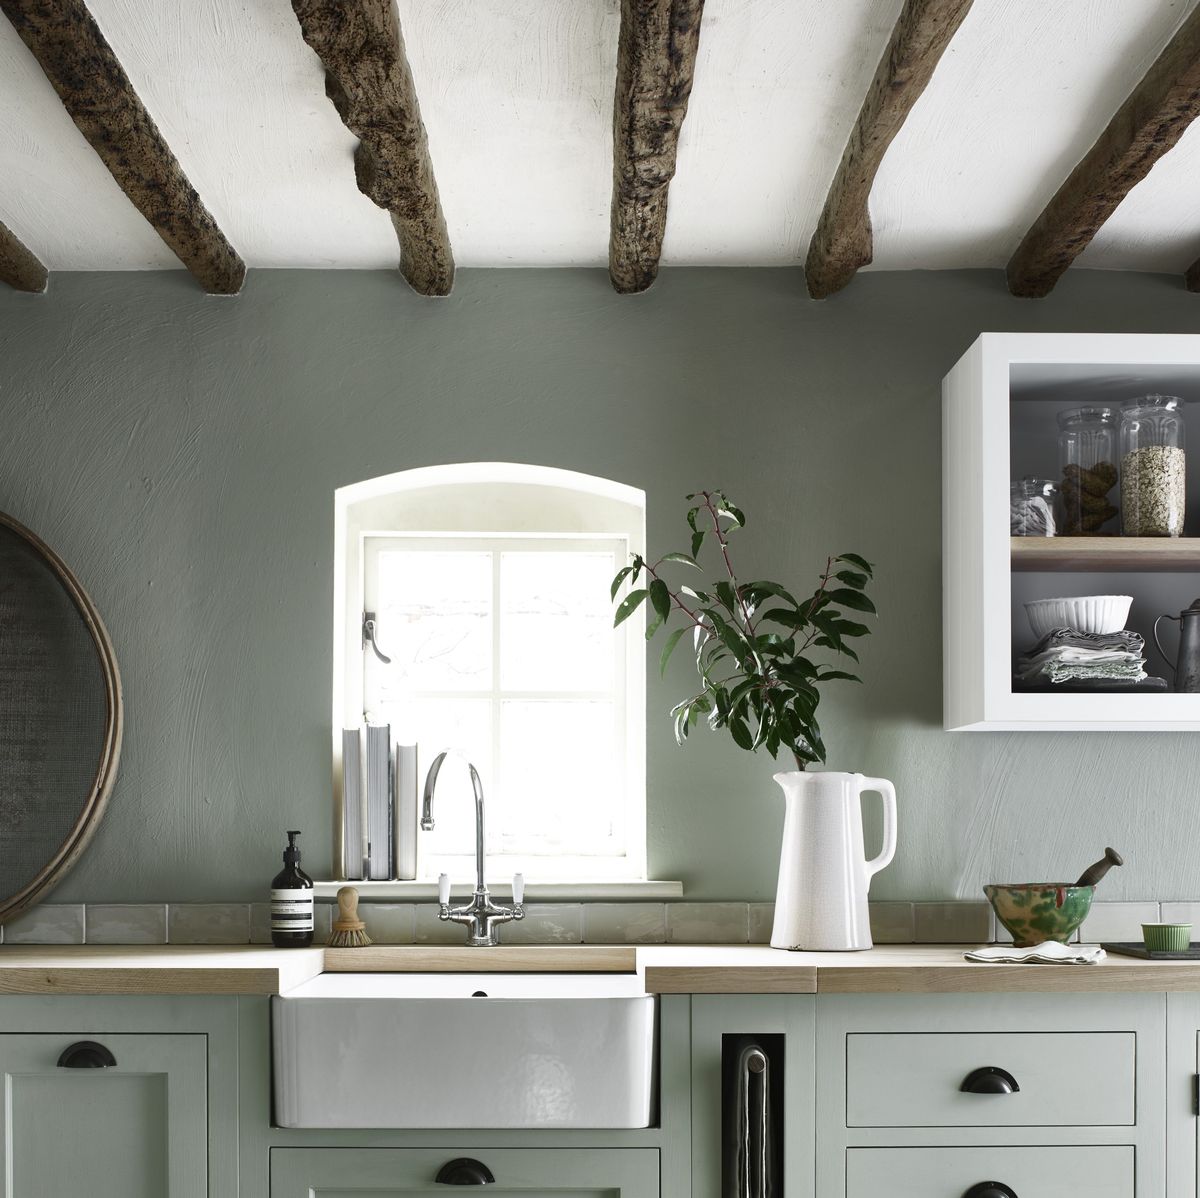 https://hips.hearstapps.com/housebeautiful.cdnds.net/17/39/1506512811-neptune-henley-kitchen-hand-painted-in-sage-from-14000-3.jpg?crop=0.966xw:0.723xh;0.00641xw,0.0349xh&resize=1200:*